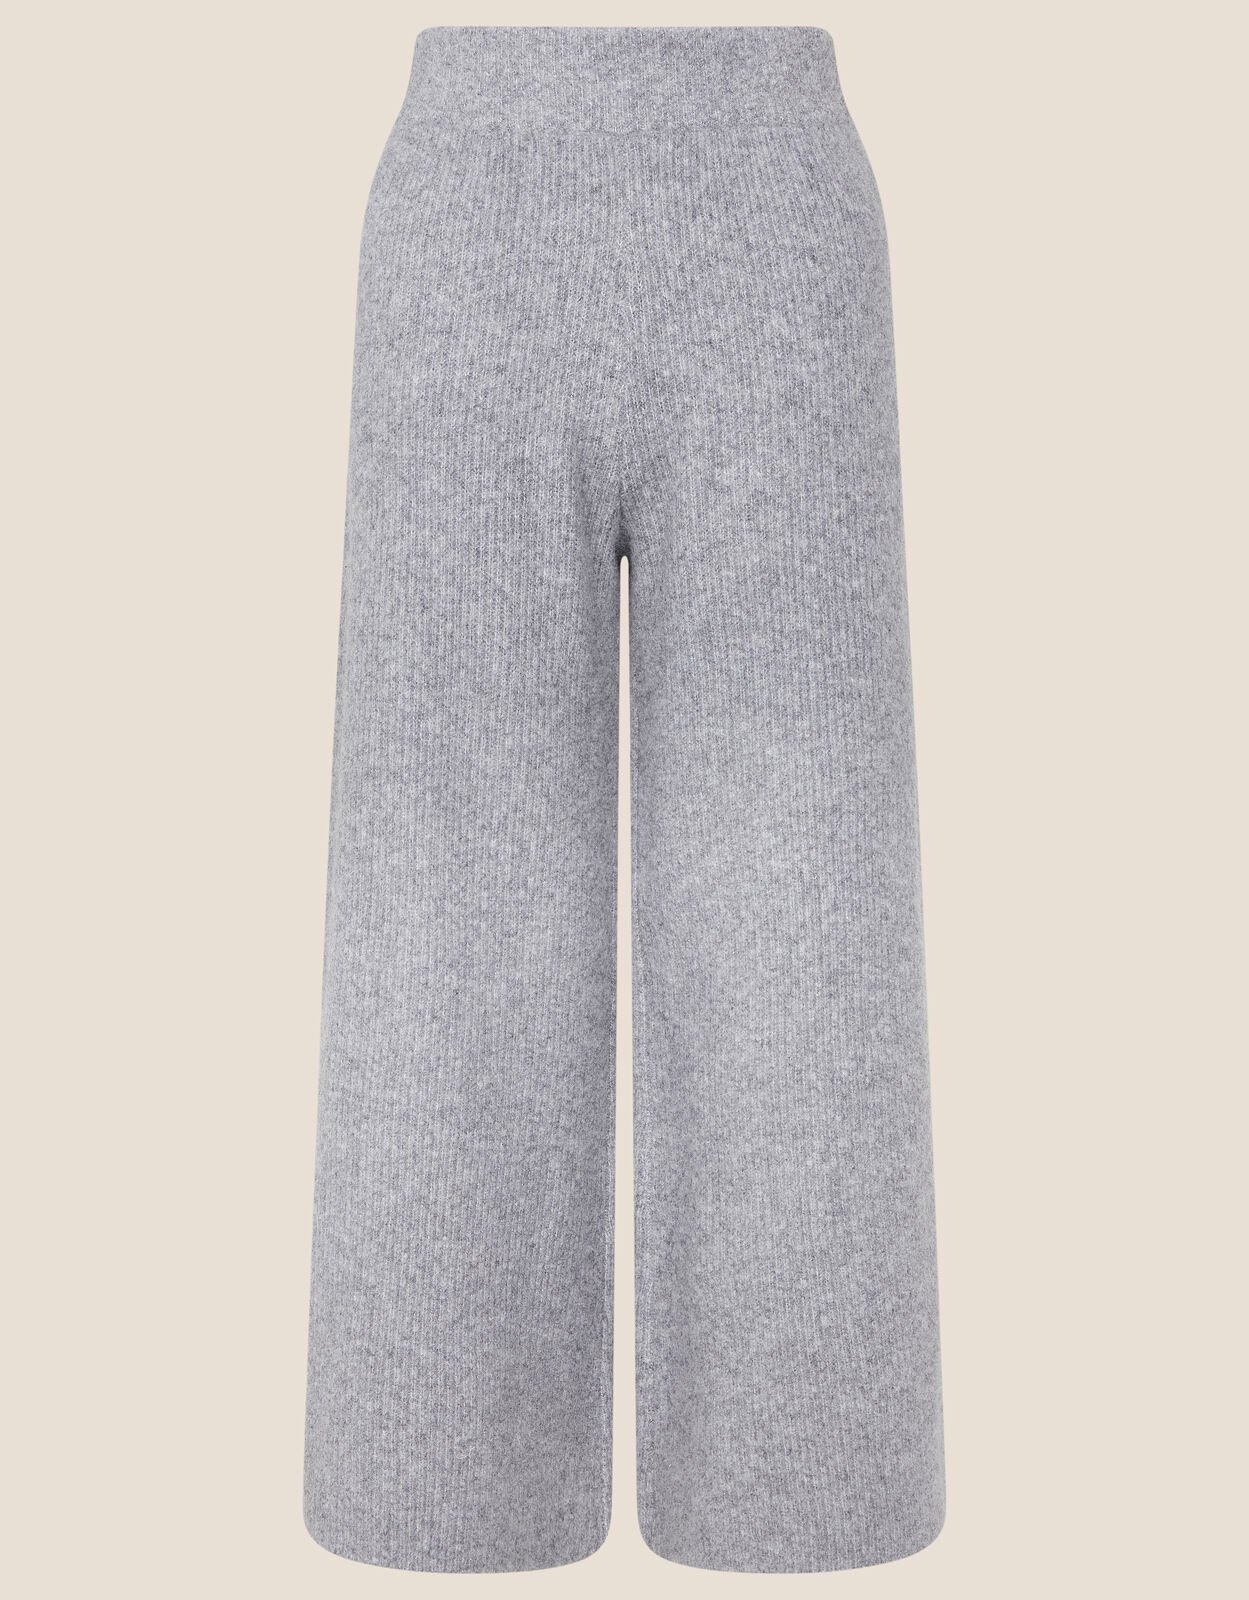 Whistles Knitted Wide Leg Trousers Grey Marl at John Lewis  Partners